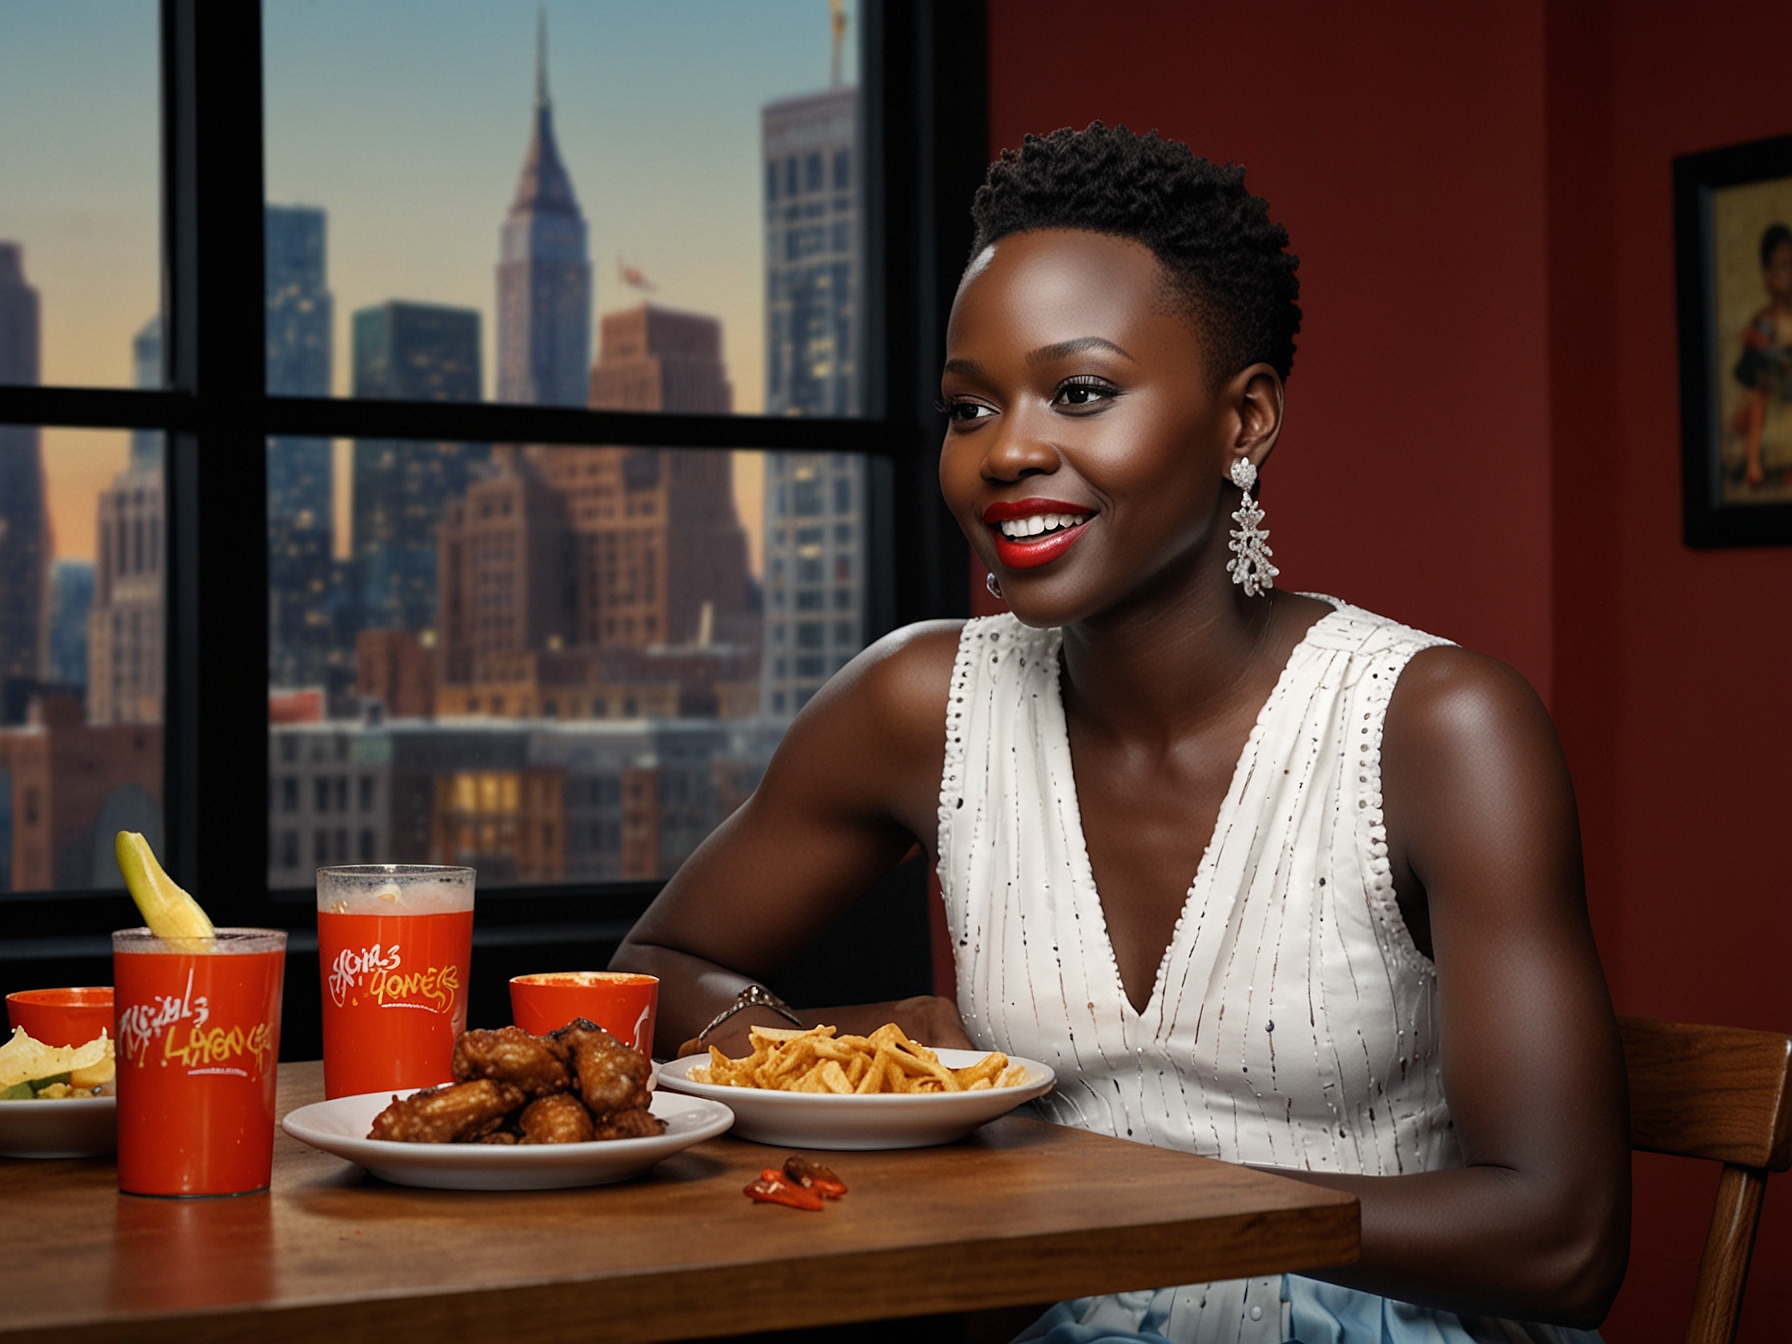 Lupita Nyong’o shares her story on 'Hot Ones,' discussing her crucial role in obtaining rights to a Taylor Swift song for 'Little Monsters,' while eating spicy chicken wings.